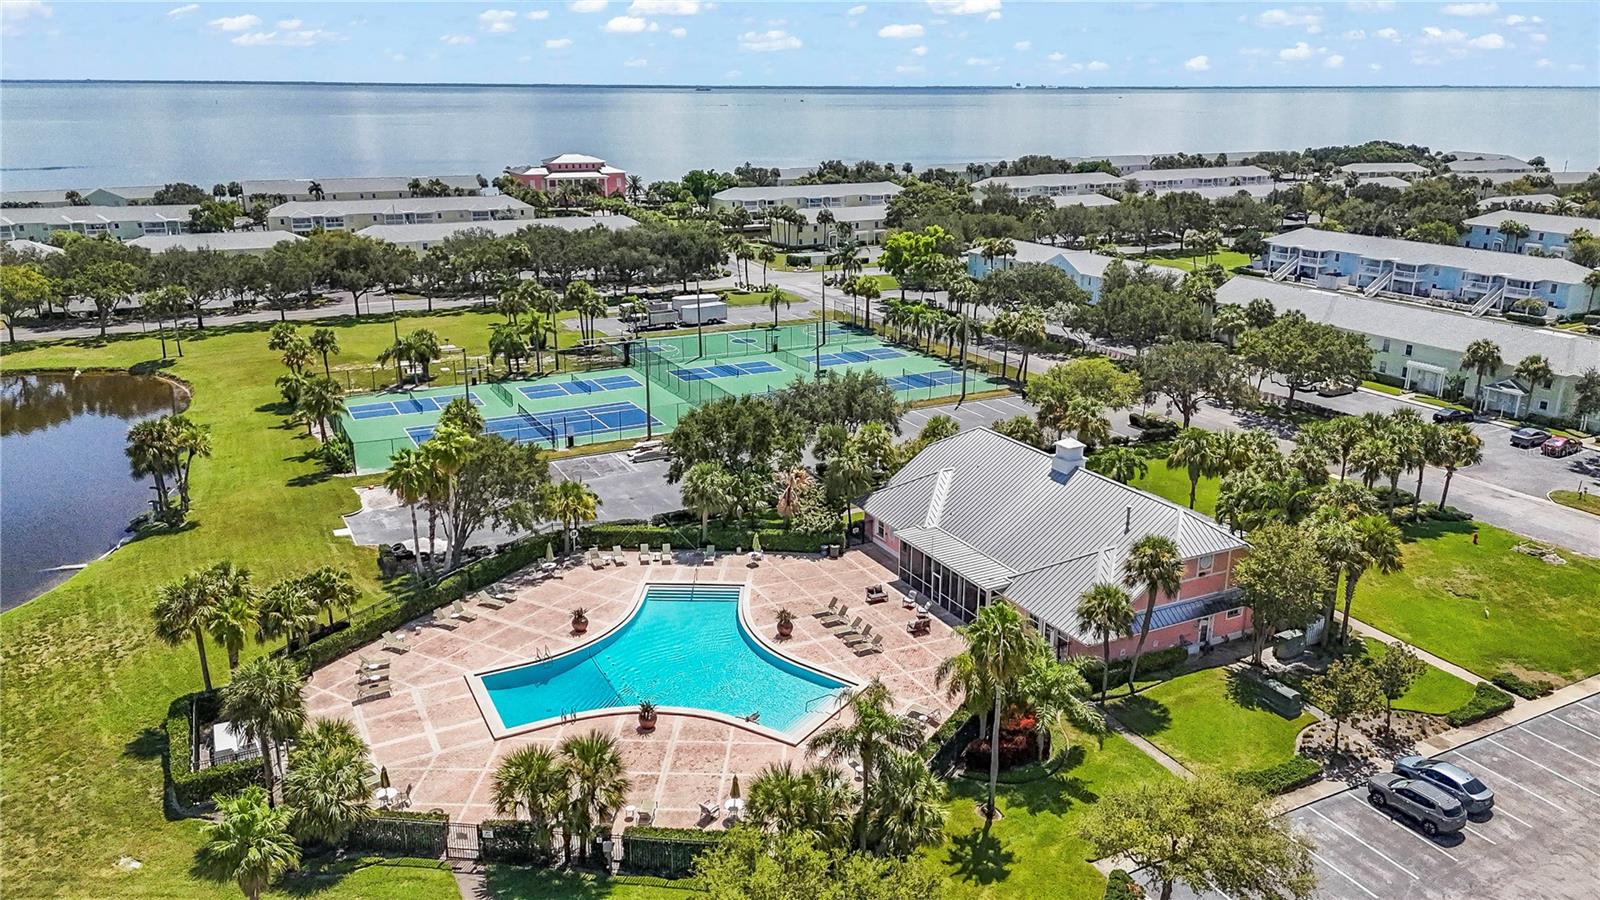 Waterside at Coquina Key South has 2 resort style swimming pools, tennis courts, pickle ball courts, basketball courts, and state of the art fitness center!  You will never had to leave your community!